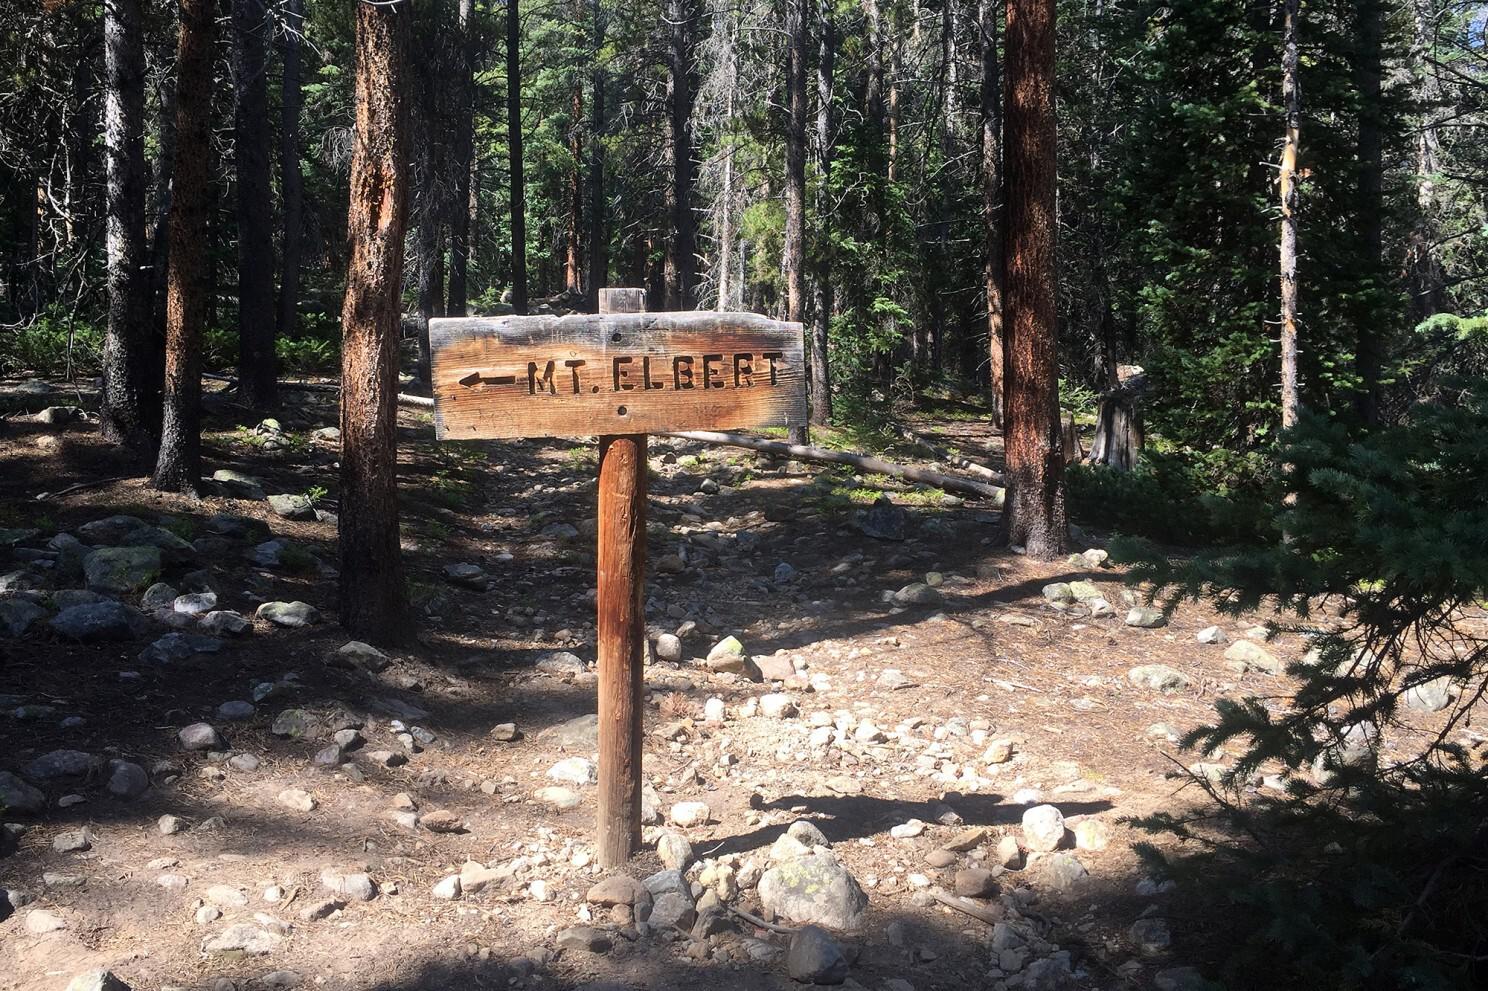 Hiker Lost For 24 Hours Ignored Rescuers' Calls Because Number Was Unrecognized